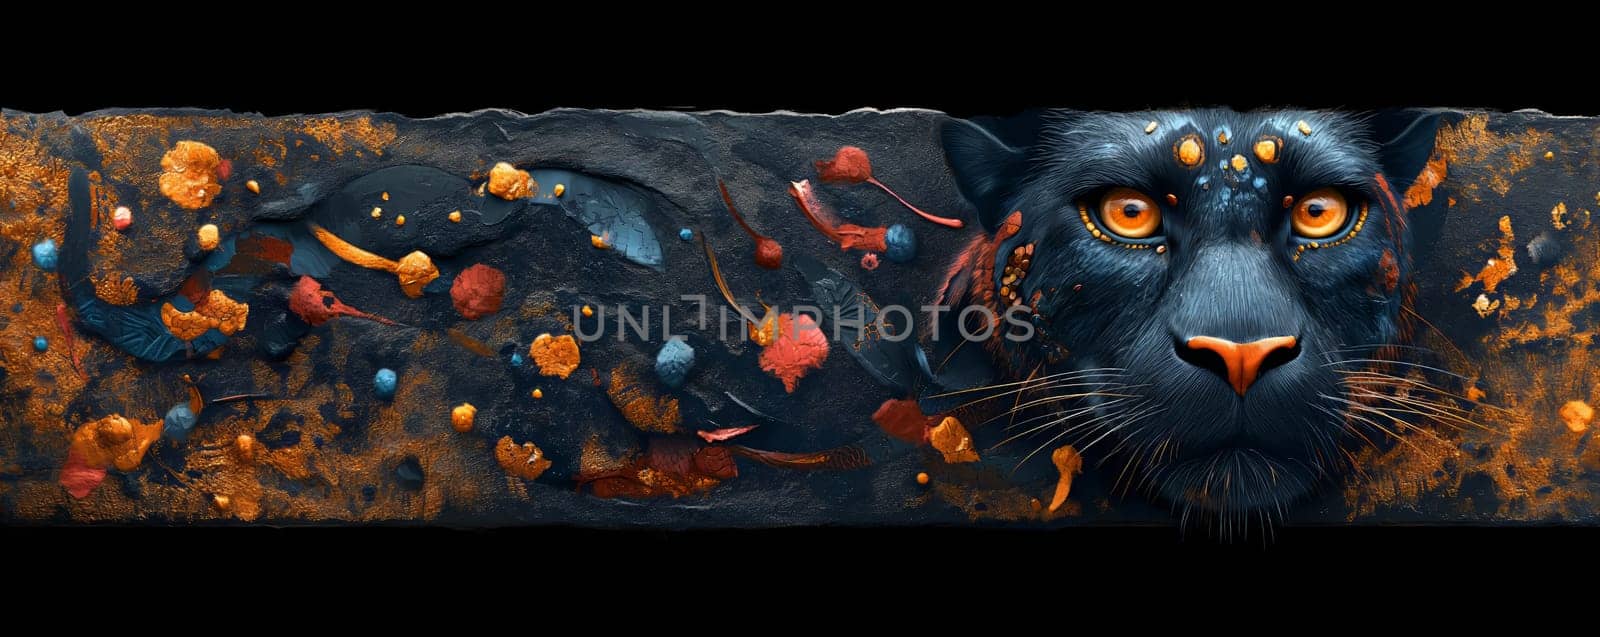 A painting of a black cat with striking orange eyes by Fischeron